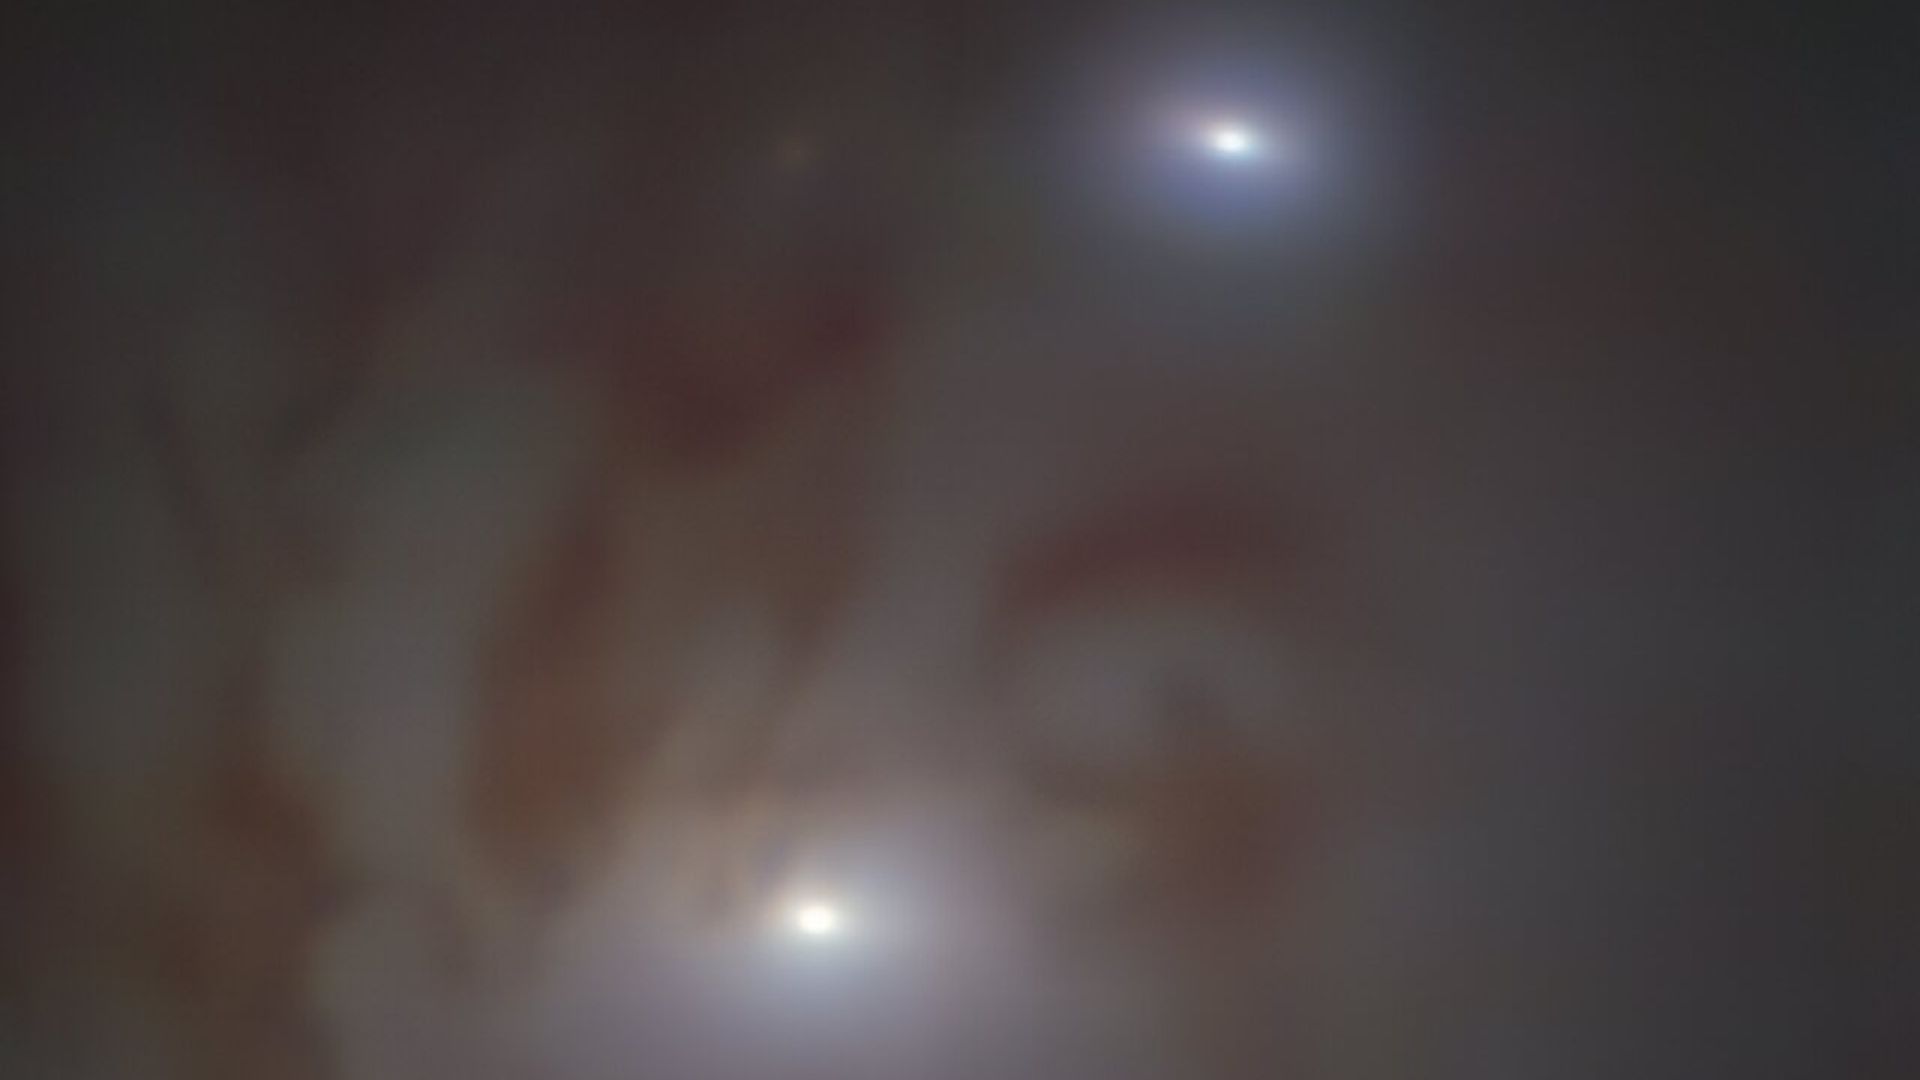 Two black holes (bright, white dots) not far from one another, heading for a collision